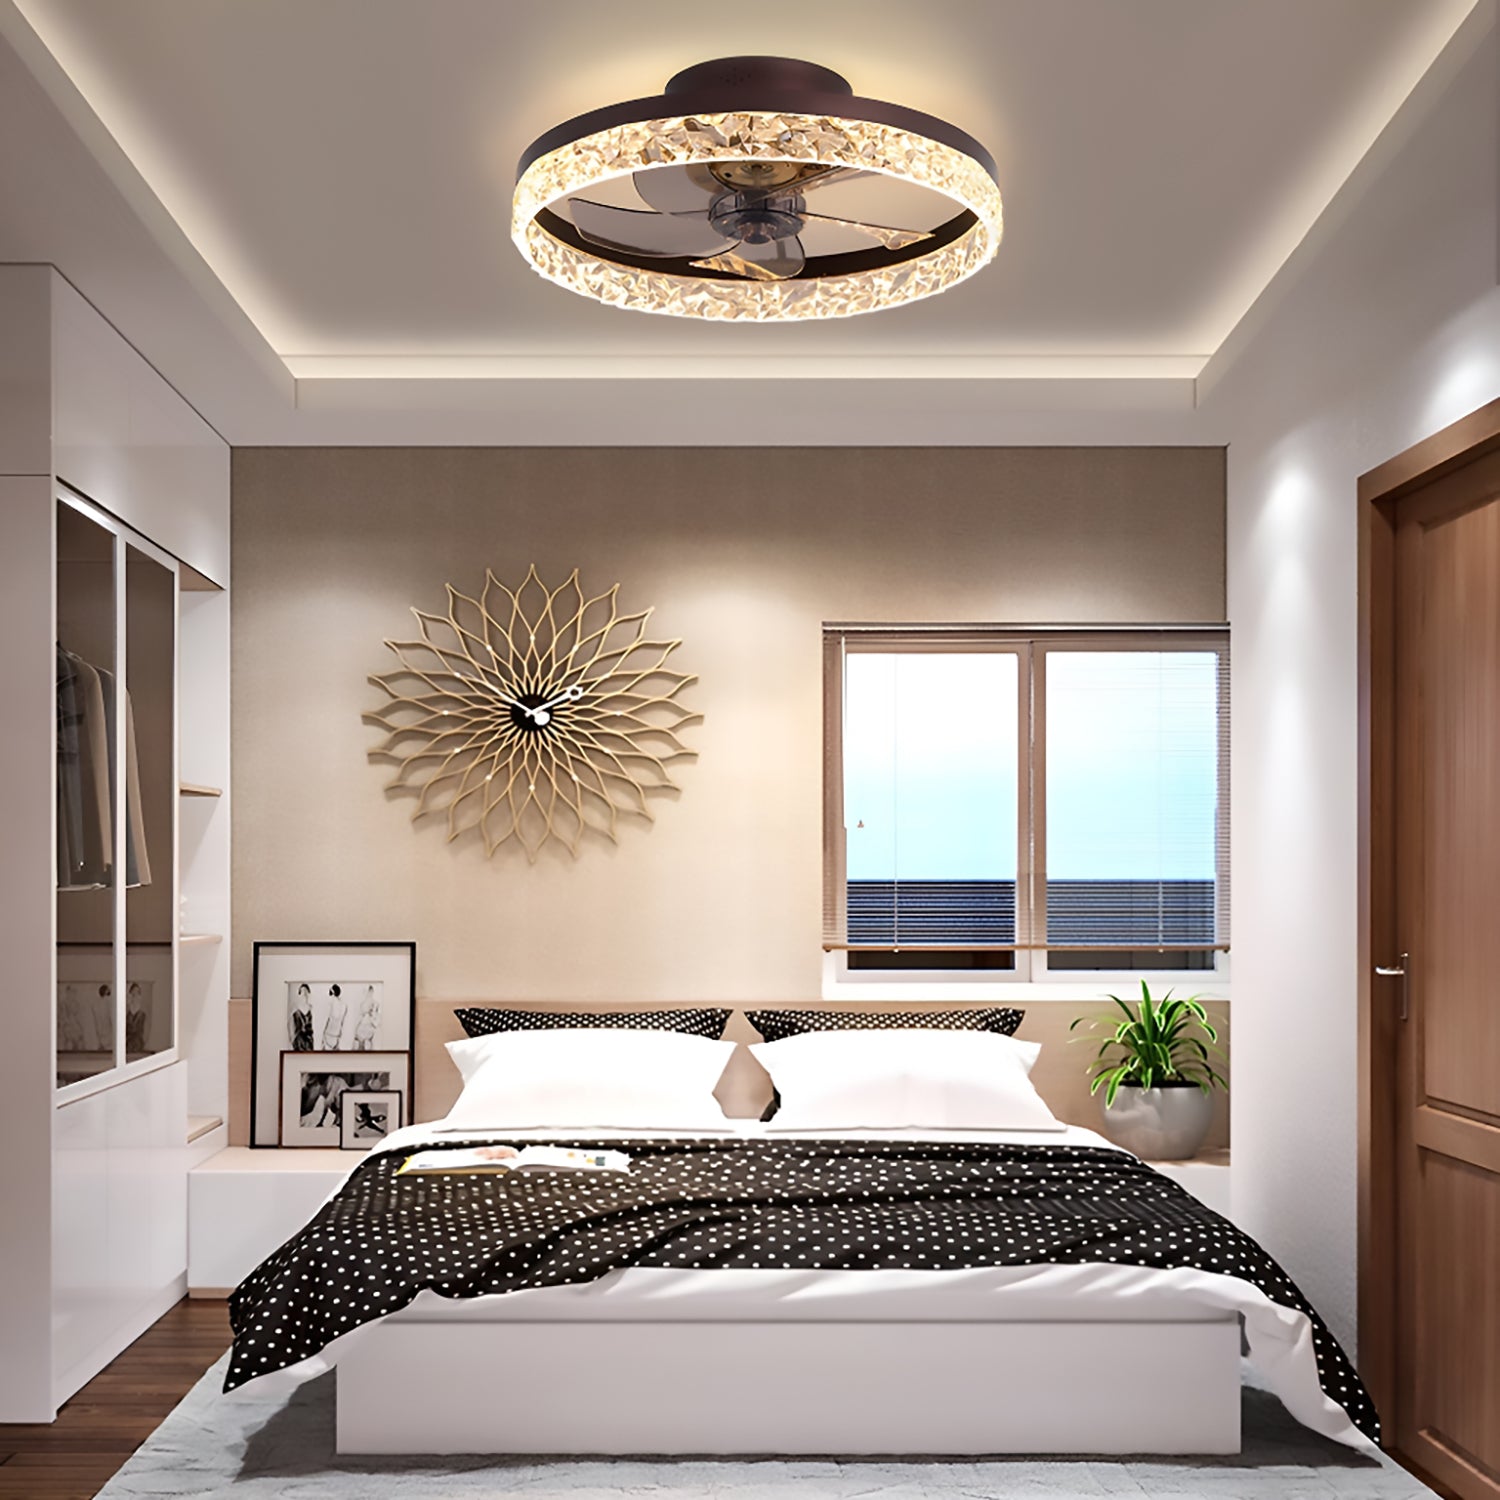 Circular Ceiling Fan Light Modern And Simple Creative Embedded Integrated Sofary Lighting